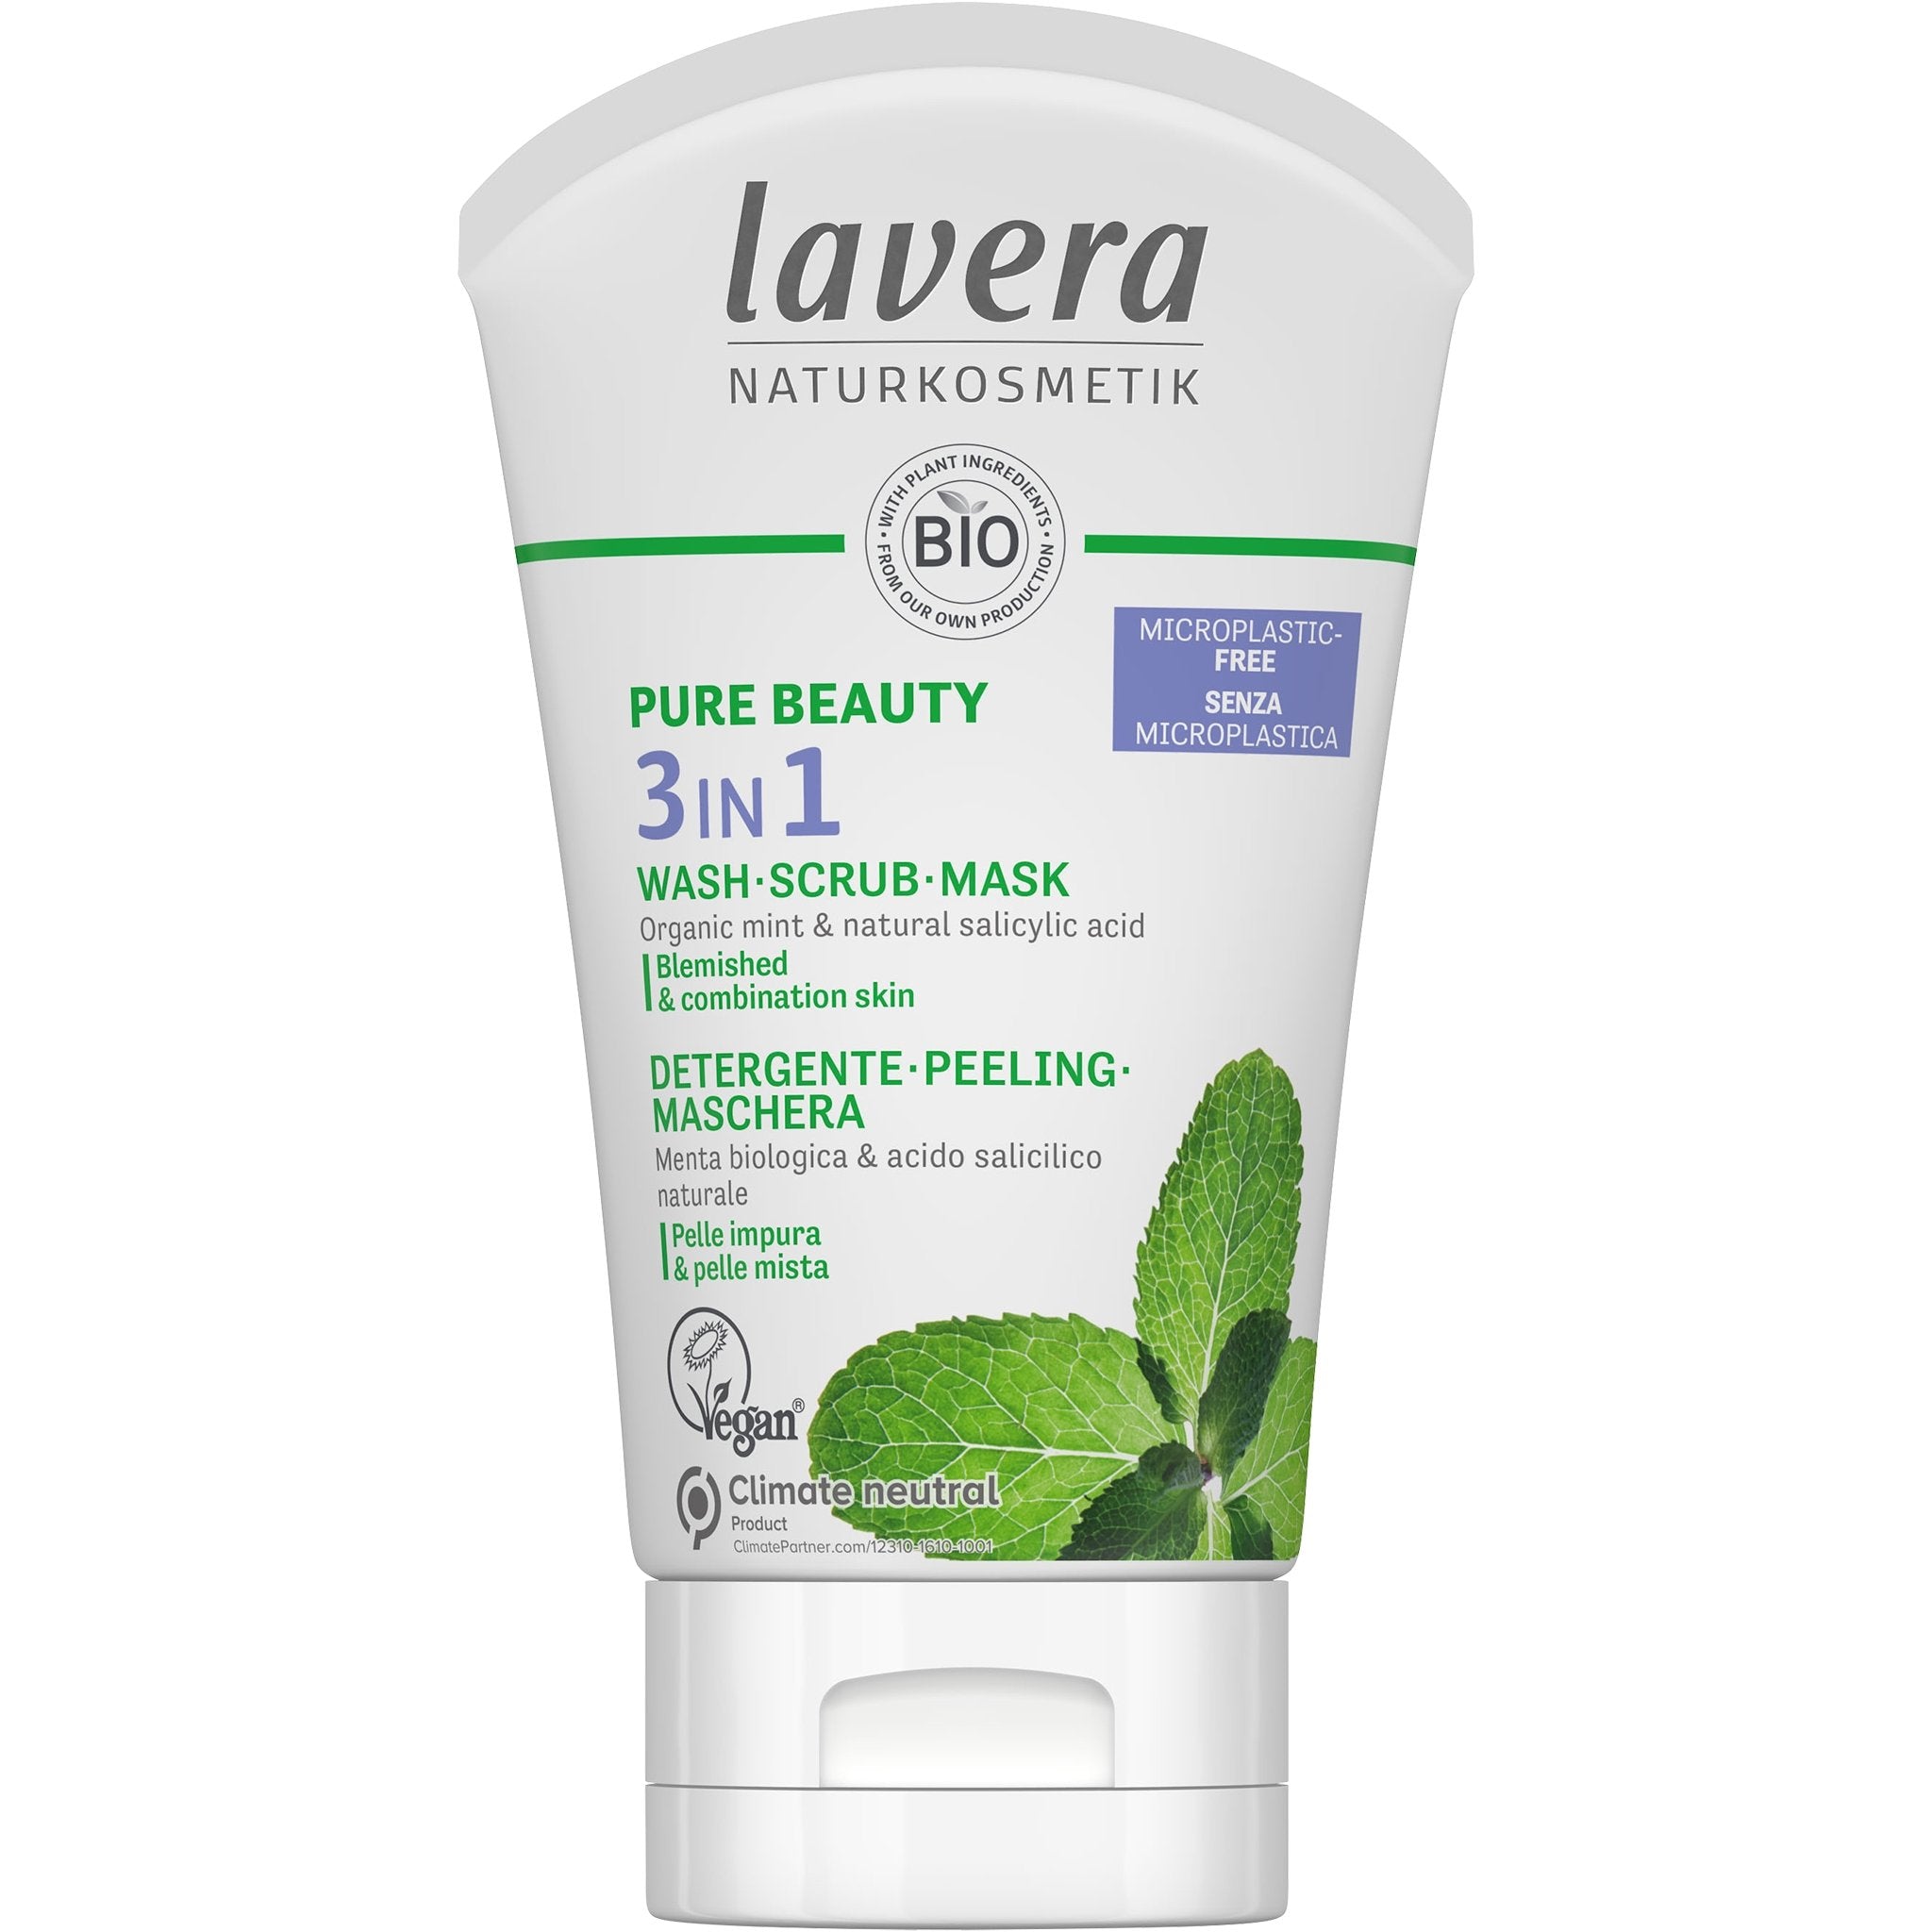 Pure Beauty - 3 in 1 Wash, Scrub and Mask - mypure.co.uk